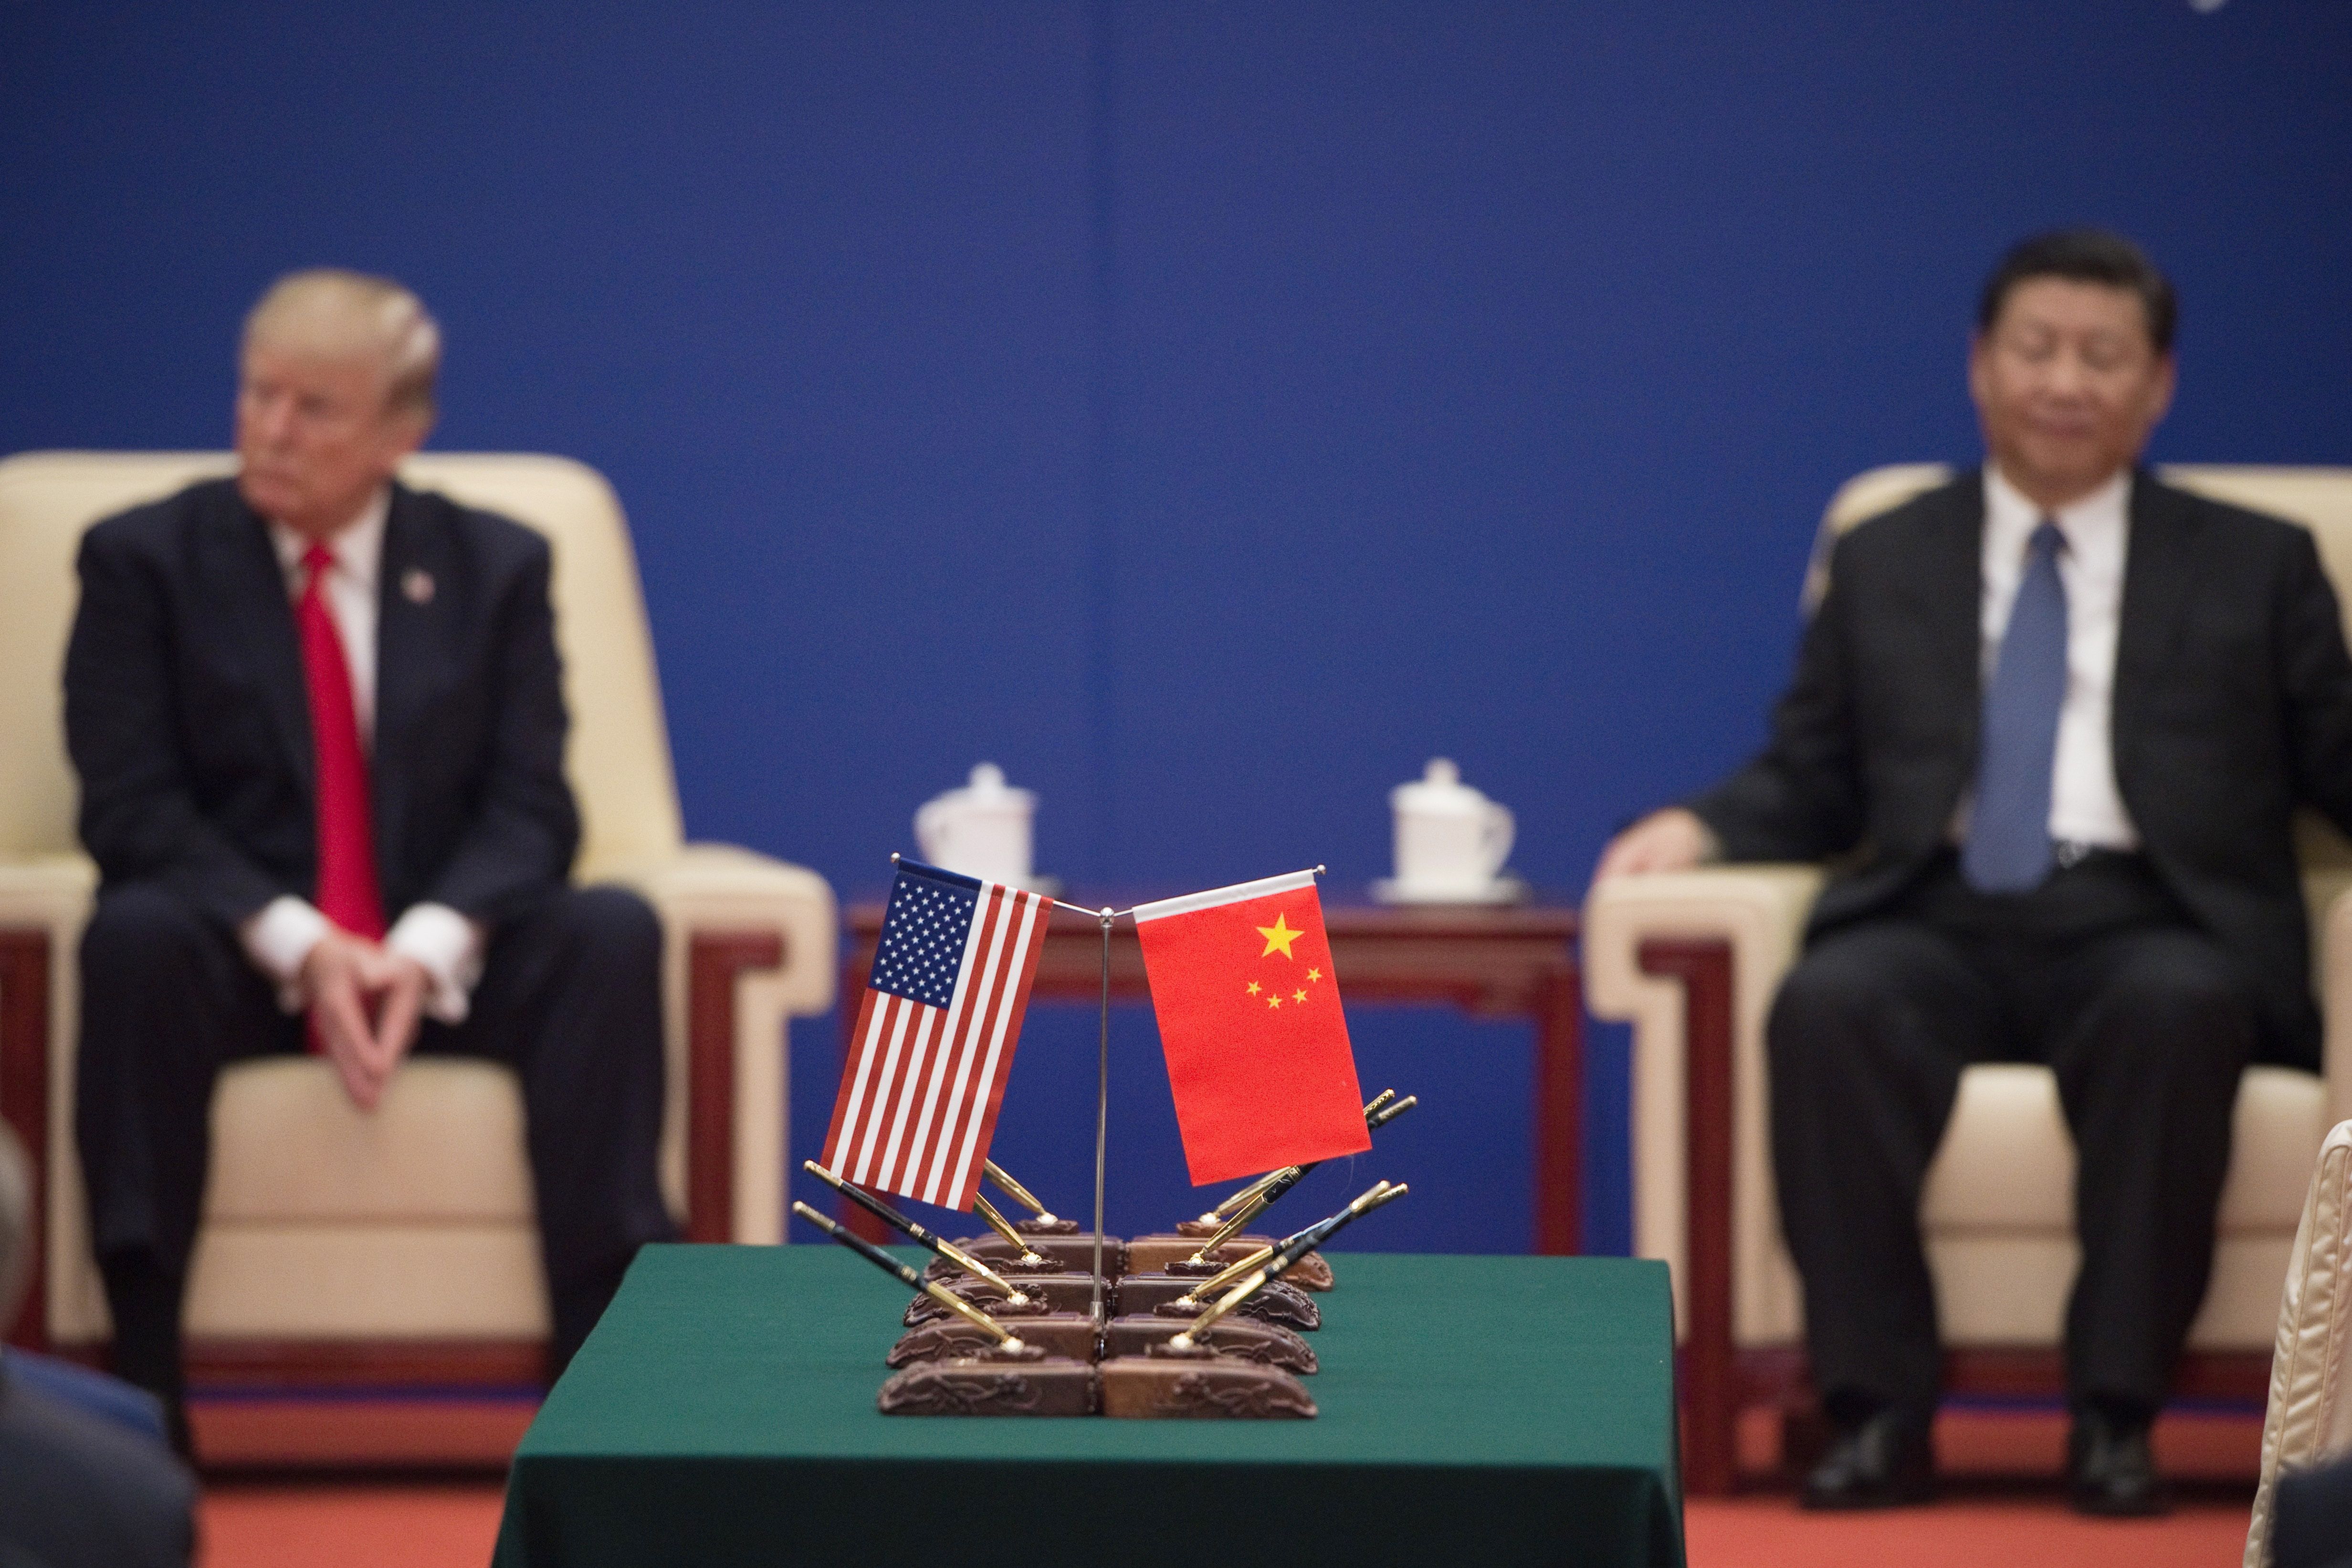 US President Donald Trump (L) and China's President Xi Jinping attend a business leaders event inside the Great Hall of the People in Beijing on November 9, 2017. Donald Trump urged Chinese leader Xi Jinping to work "hard" and act fast to help resolve the North Korean nuclear crisis, during their meeting in Beijing on November 9, warning that "time is quickly running out". / AFP PHOTO / Nicolas ASFOURI (Photo credit should read NICOLAS ASFOURI/AFP via Getty Images)